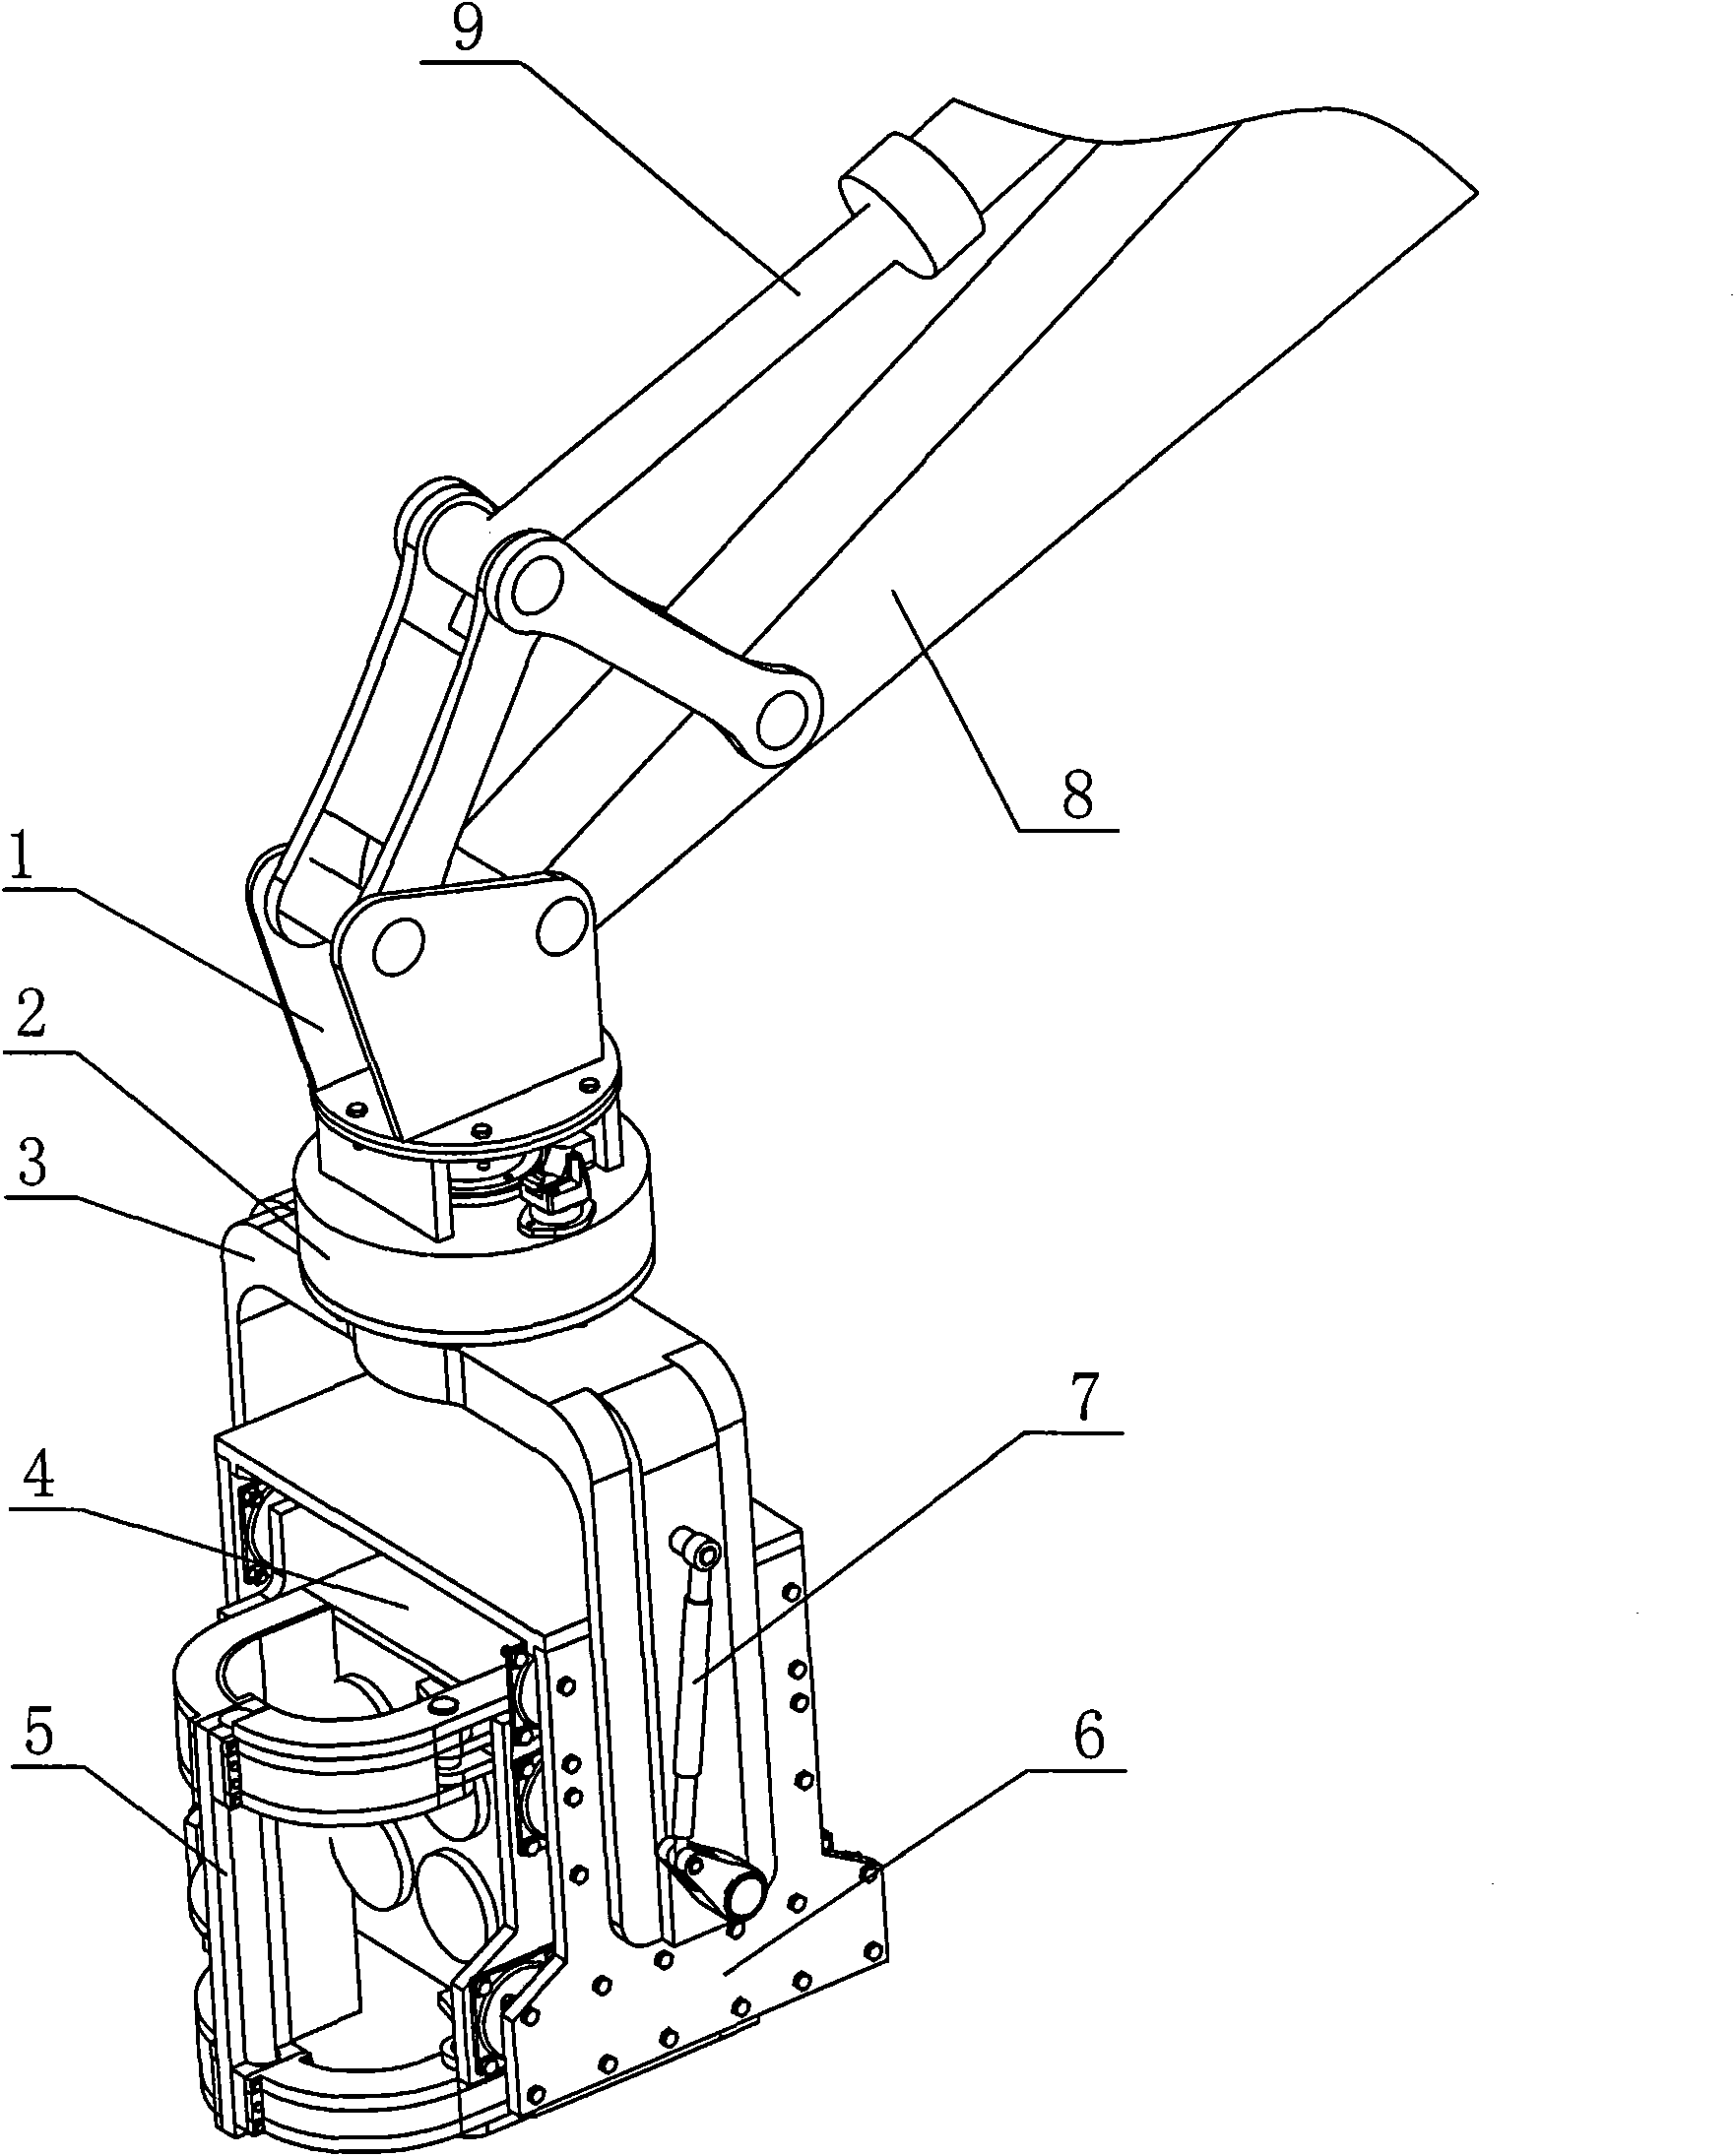 Vibration pile driving hammer with manipulation functions of multiple degrees of freedom